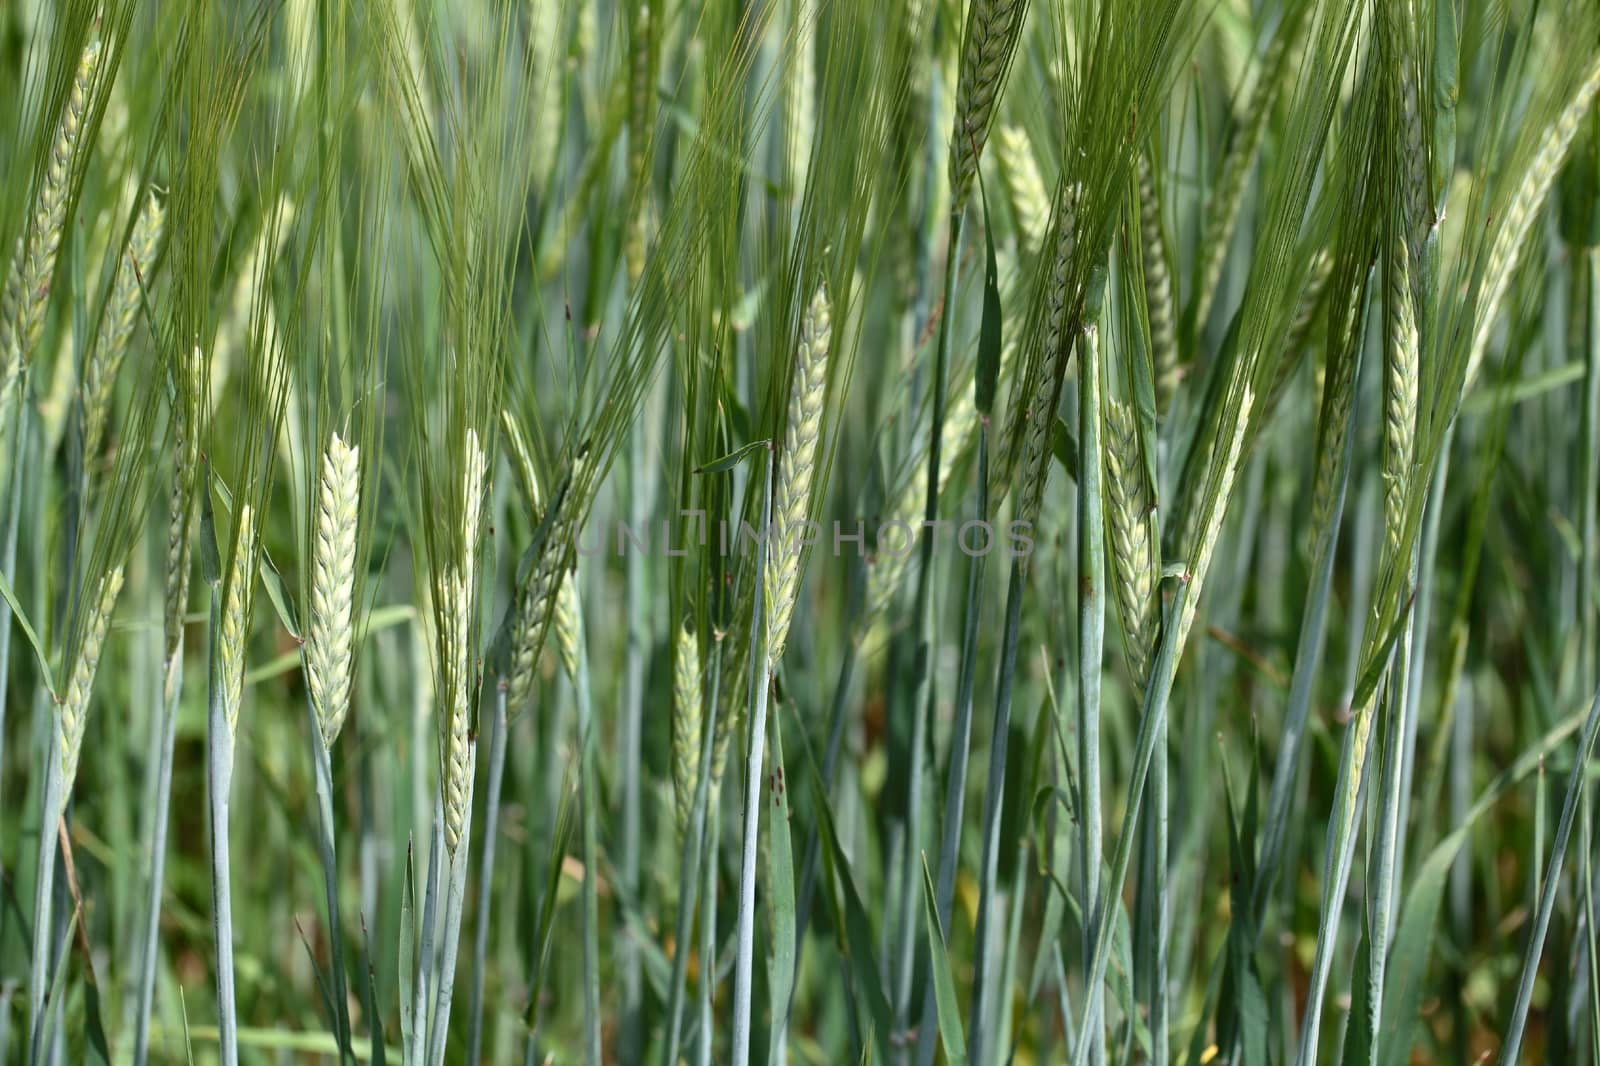 Photo of a green barley field in summer.